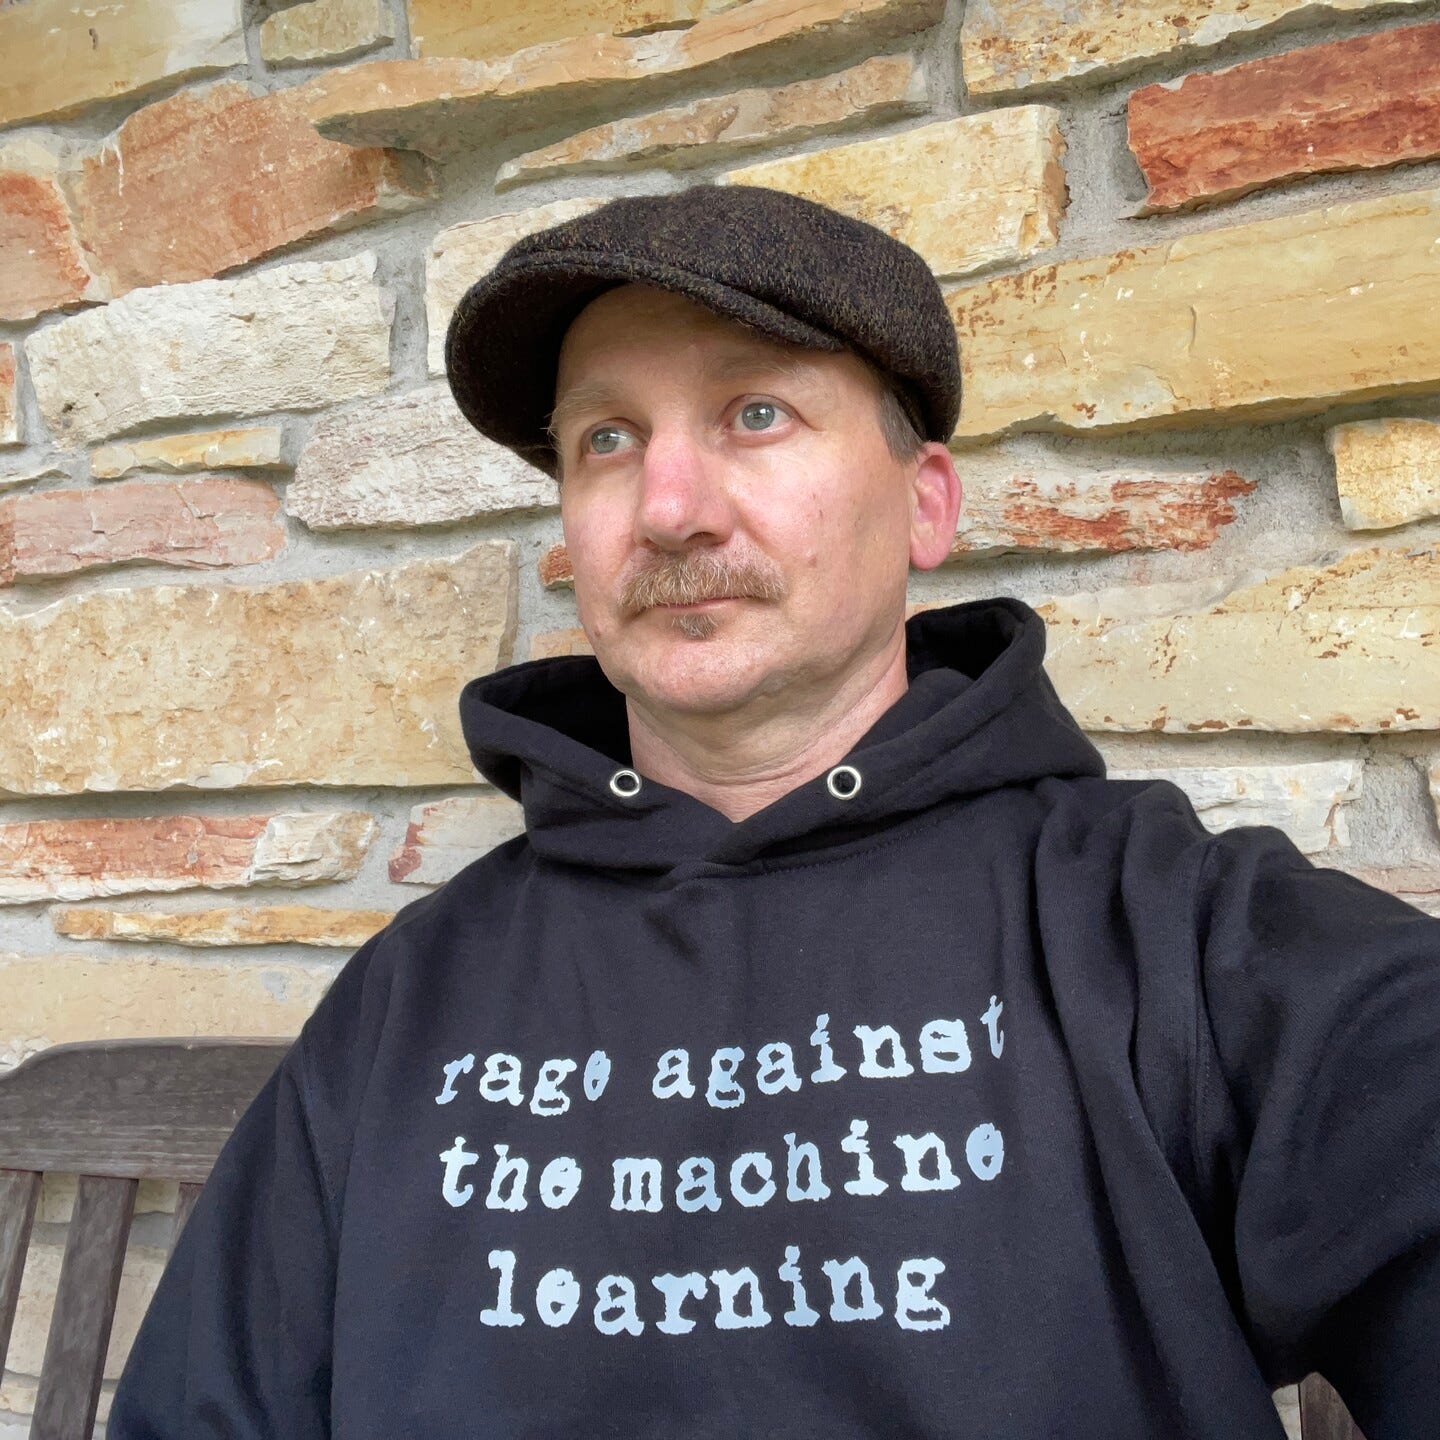 @kbroman in black hoodie that reads “rage against the machine learning” in white letters in a typewriter font. He’s also wearing a tweed newsboy hat and is trying to emulate a model by staring into the distance.